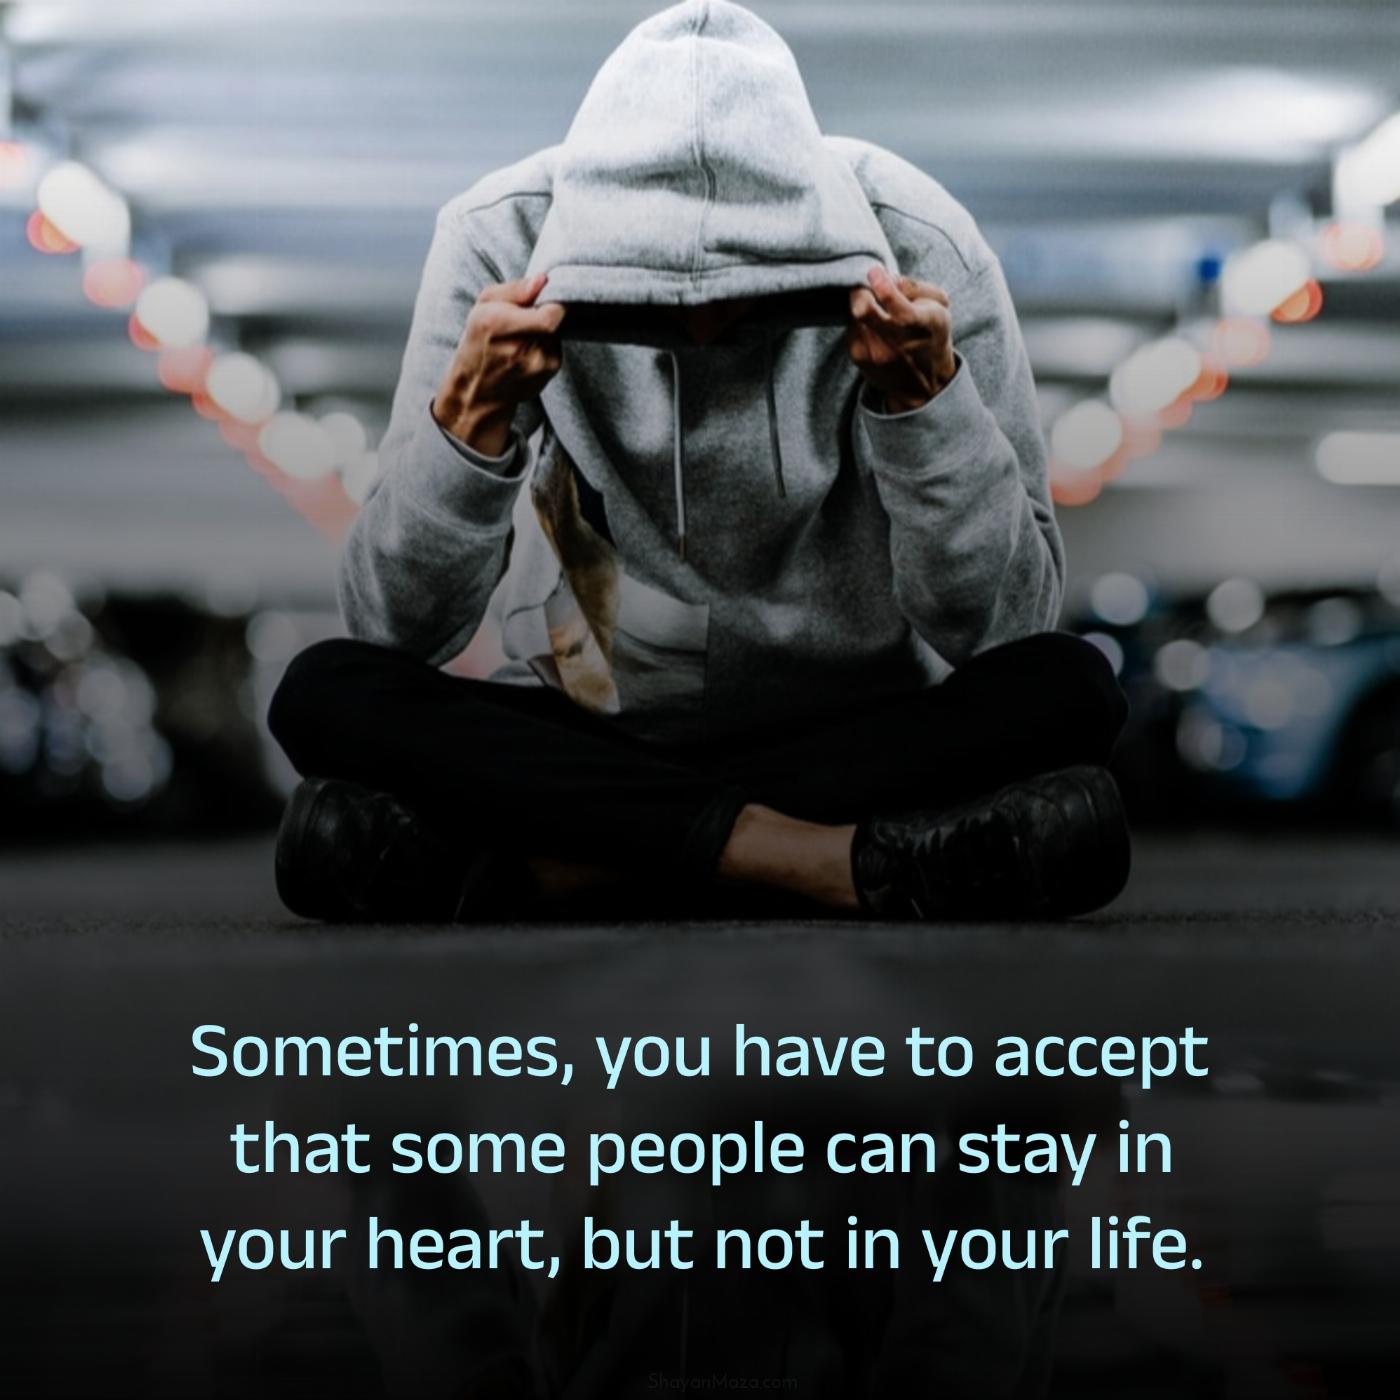 Sometimes you have to accept that some people can stay in your heart